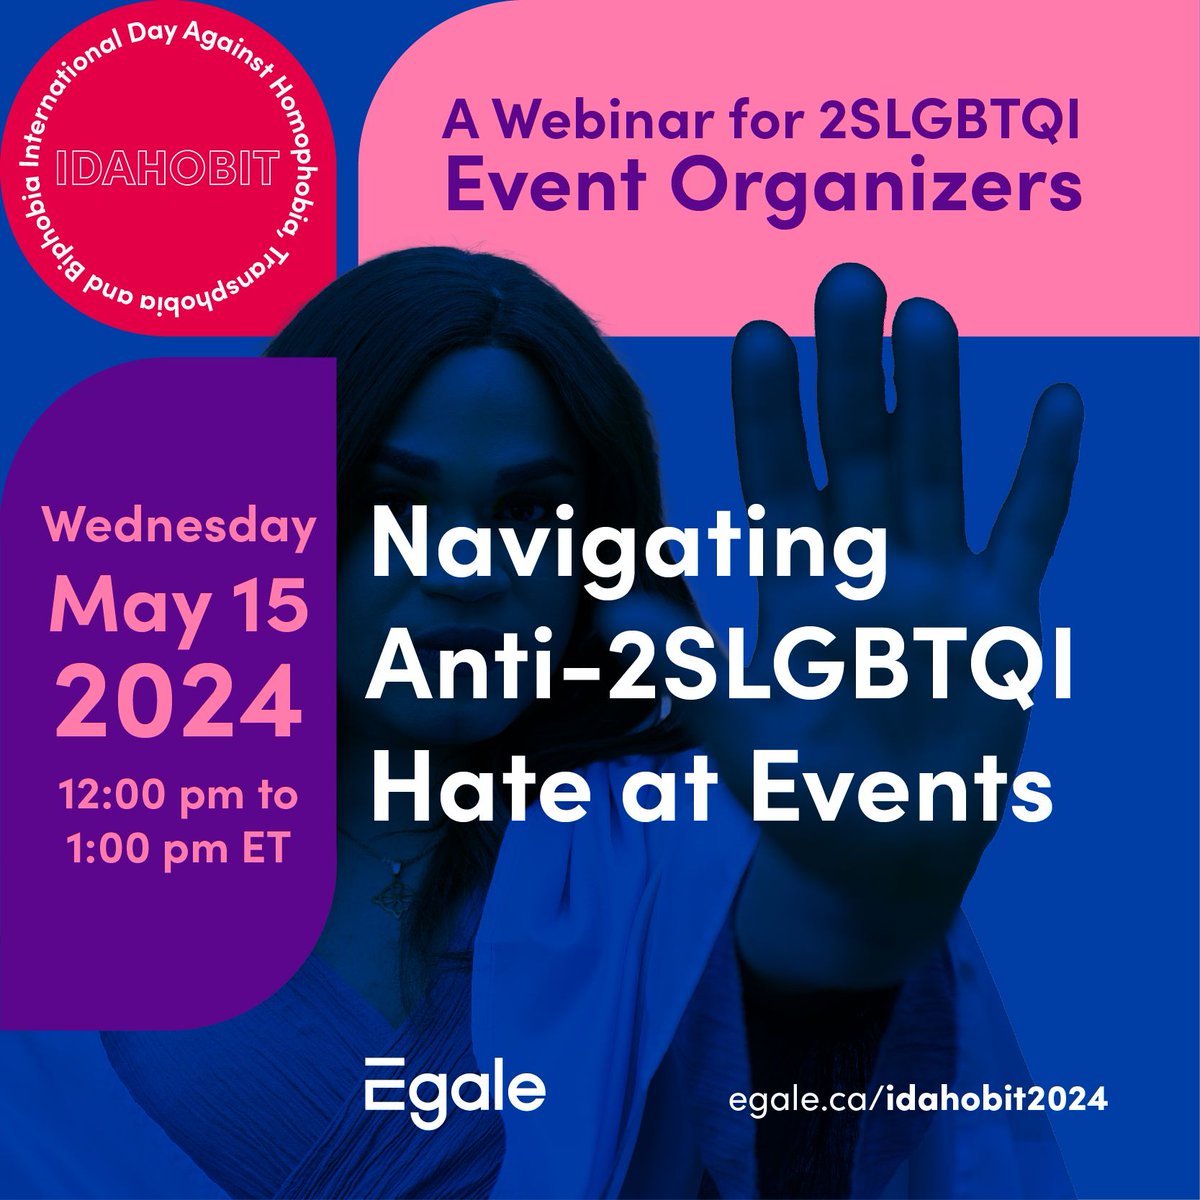 Are you an organizer of 2SLGBTQI events such as Pride festivals, parades, drag storytimes and/or protests? Join us for a free 60-minute webinar on how to create safer events amid the rise in anti-2SLGBTQI hate. Register for free at egale.ca/idahobit2024